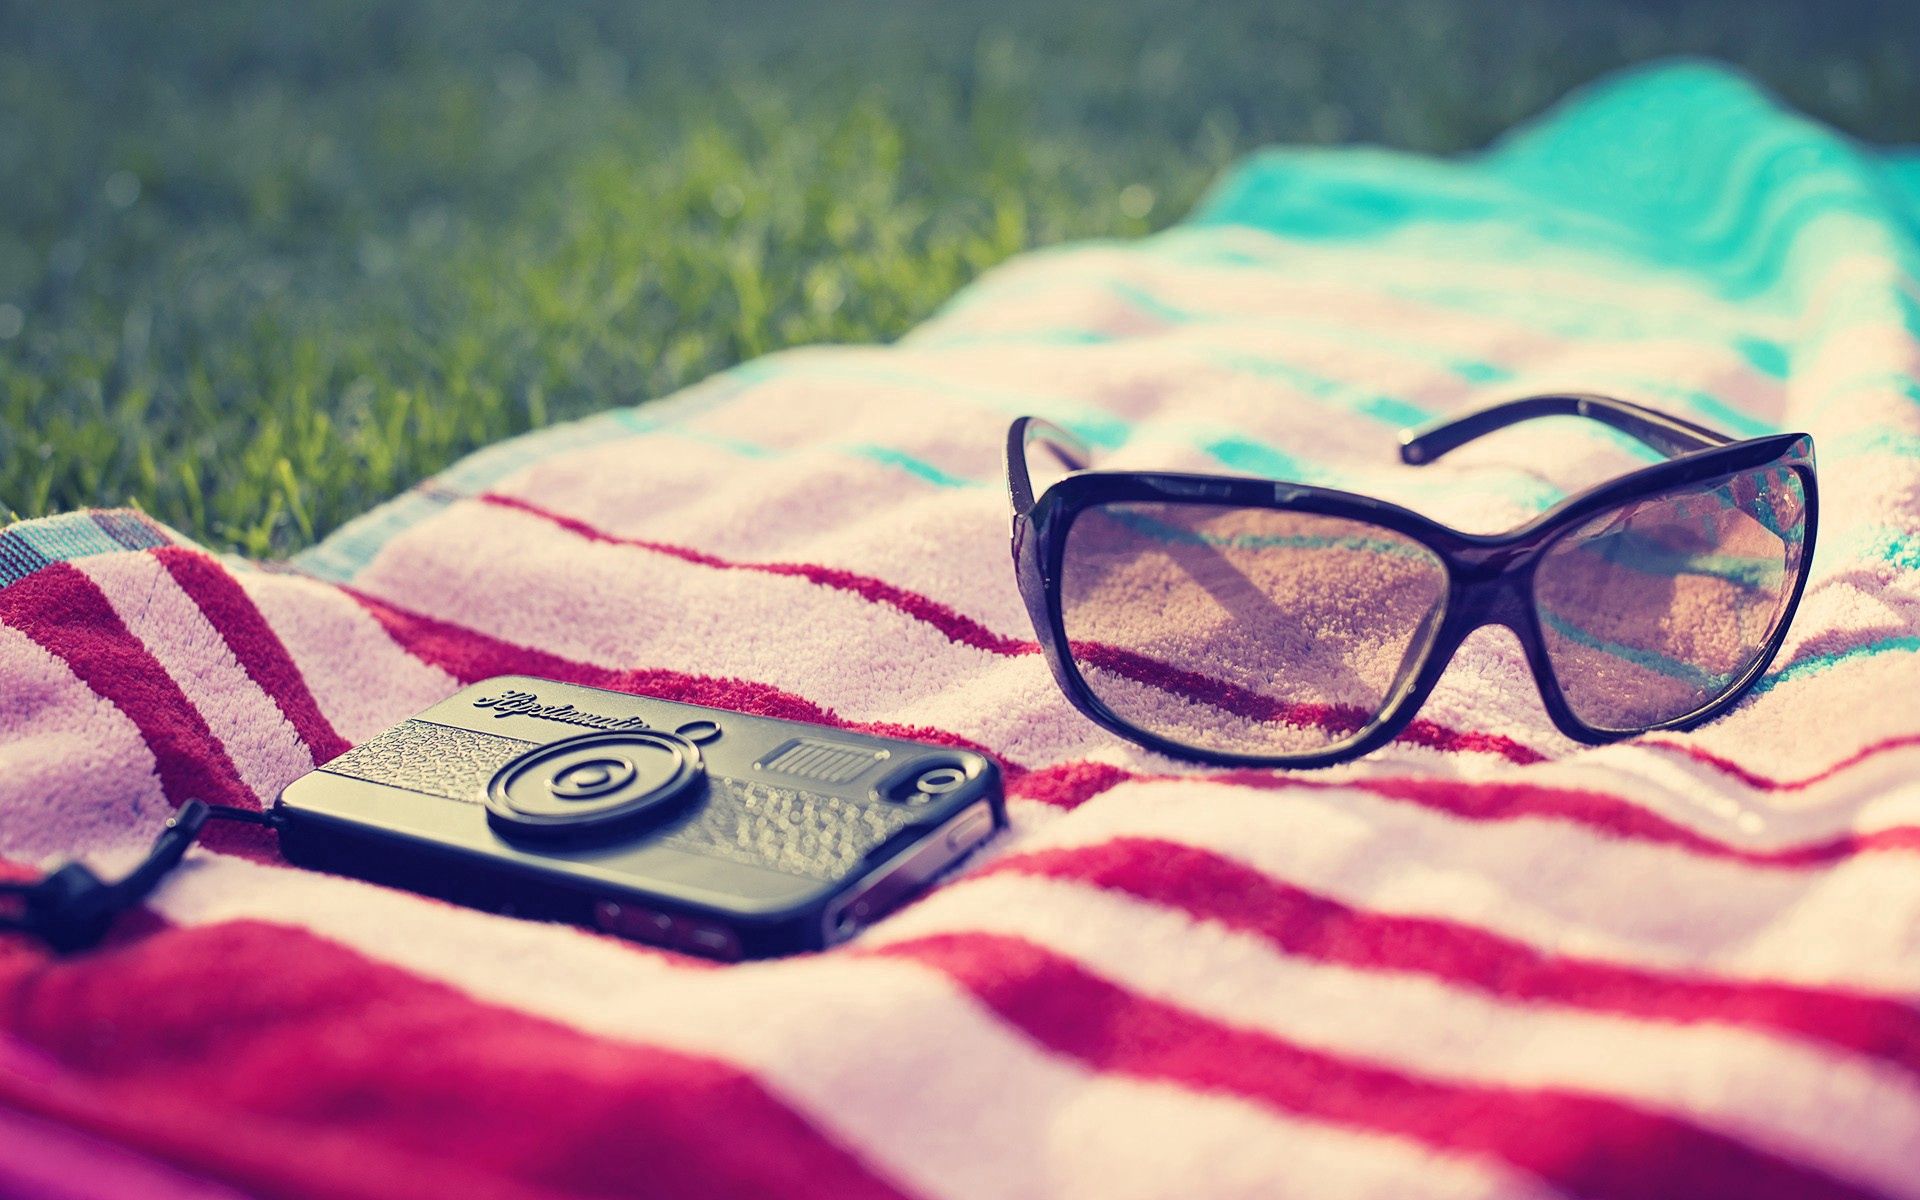 beach, summer, miscellanea, miscellaneous, glasses, spectacles, telephone, towel, towels